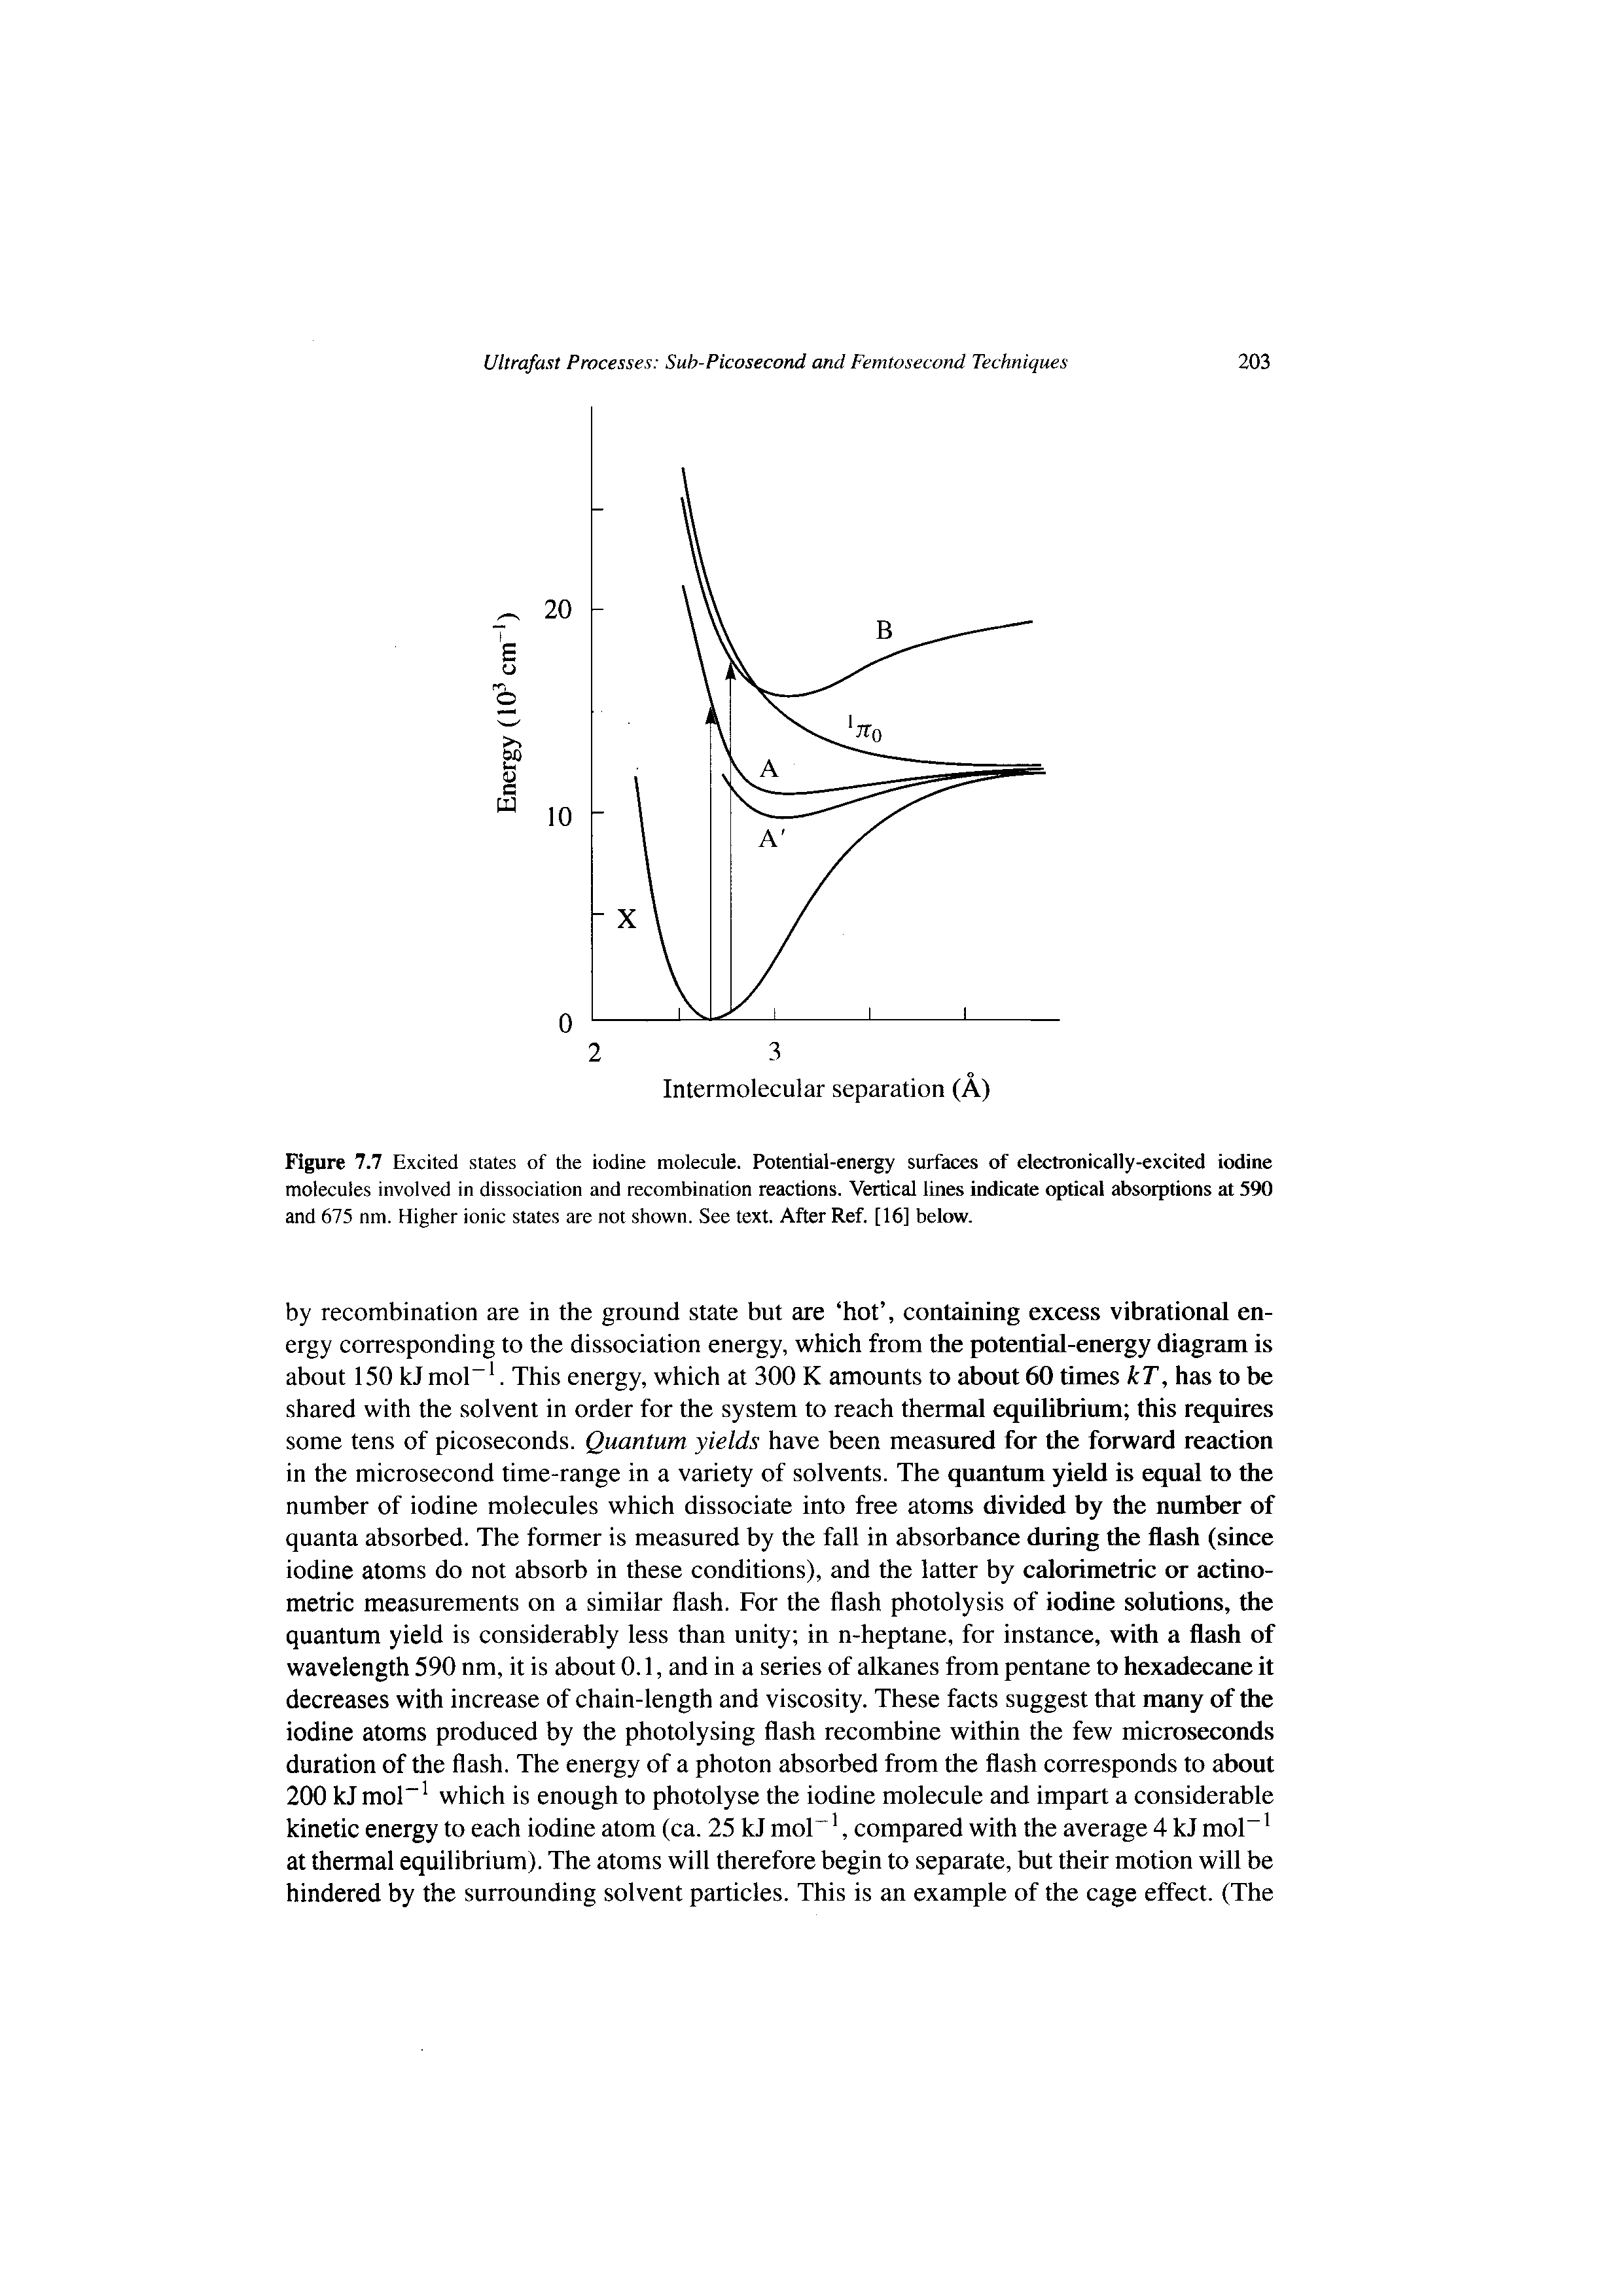 Figure 7.7 Excited states of the iodine molecule. Potential-energy surfaces of electronically-excited iodine molecules involved in dissociation and recombination reactions. Vertical lines indicate optical absorptions at 590 and 675 nm. Higher ionic states are not shown. See text. After Ref. [16] below.